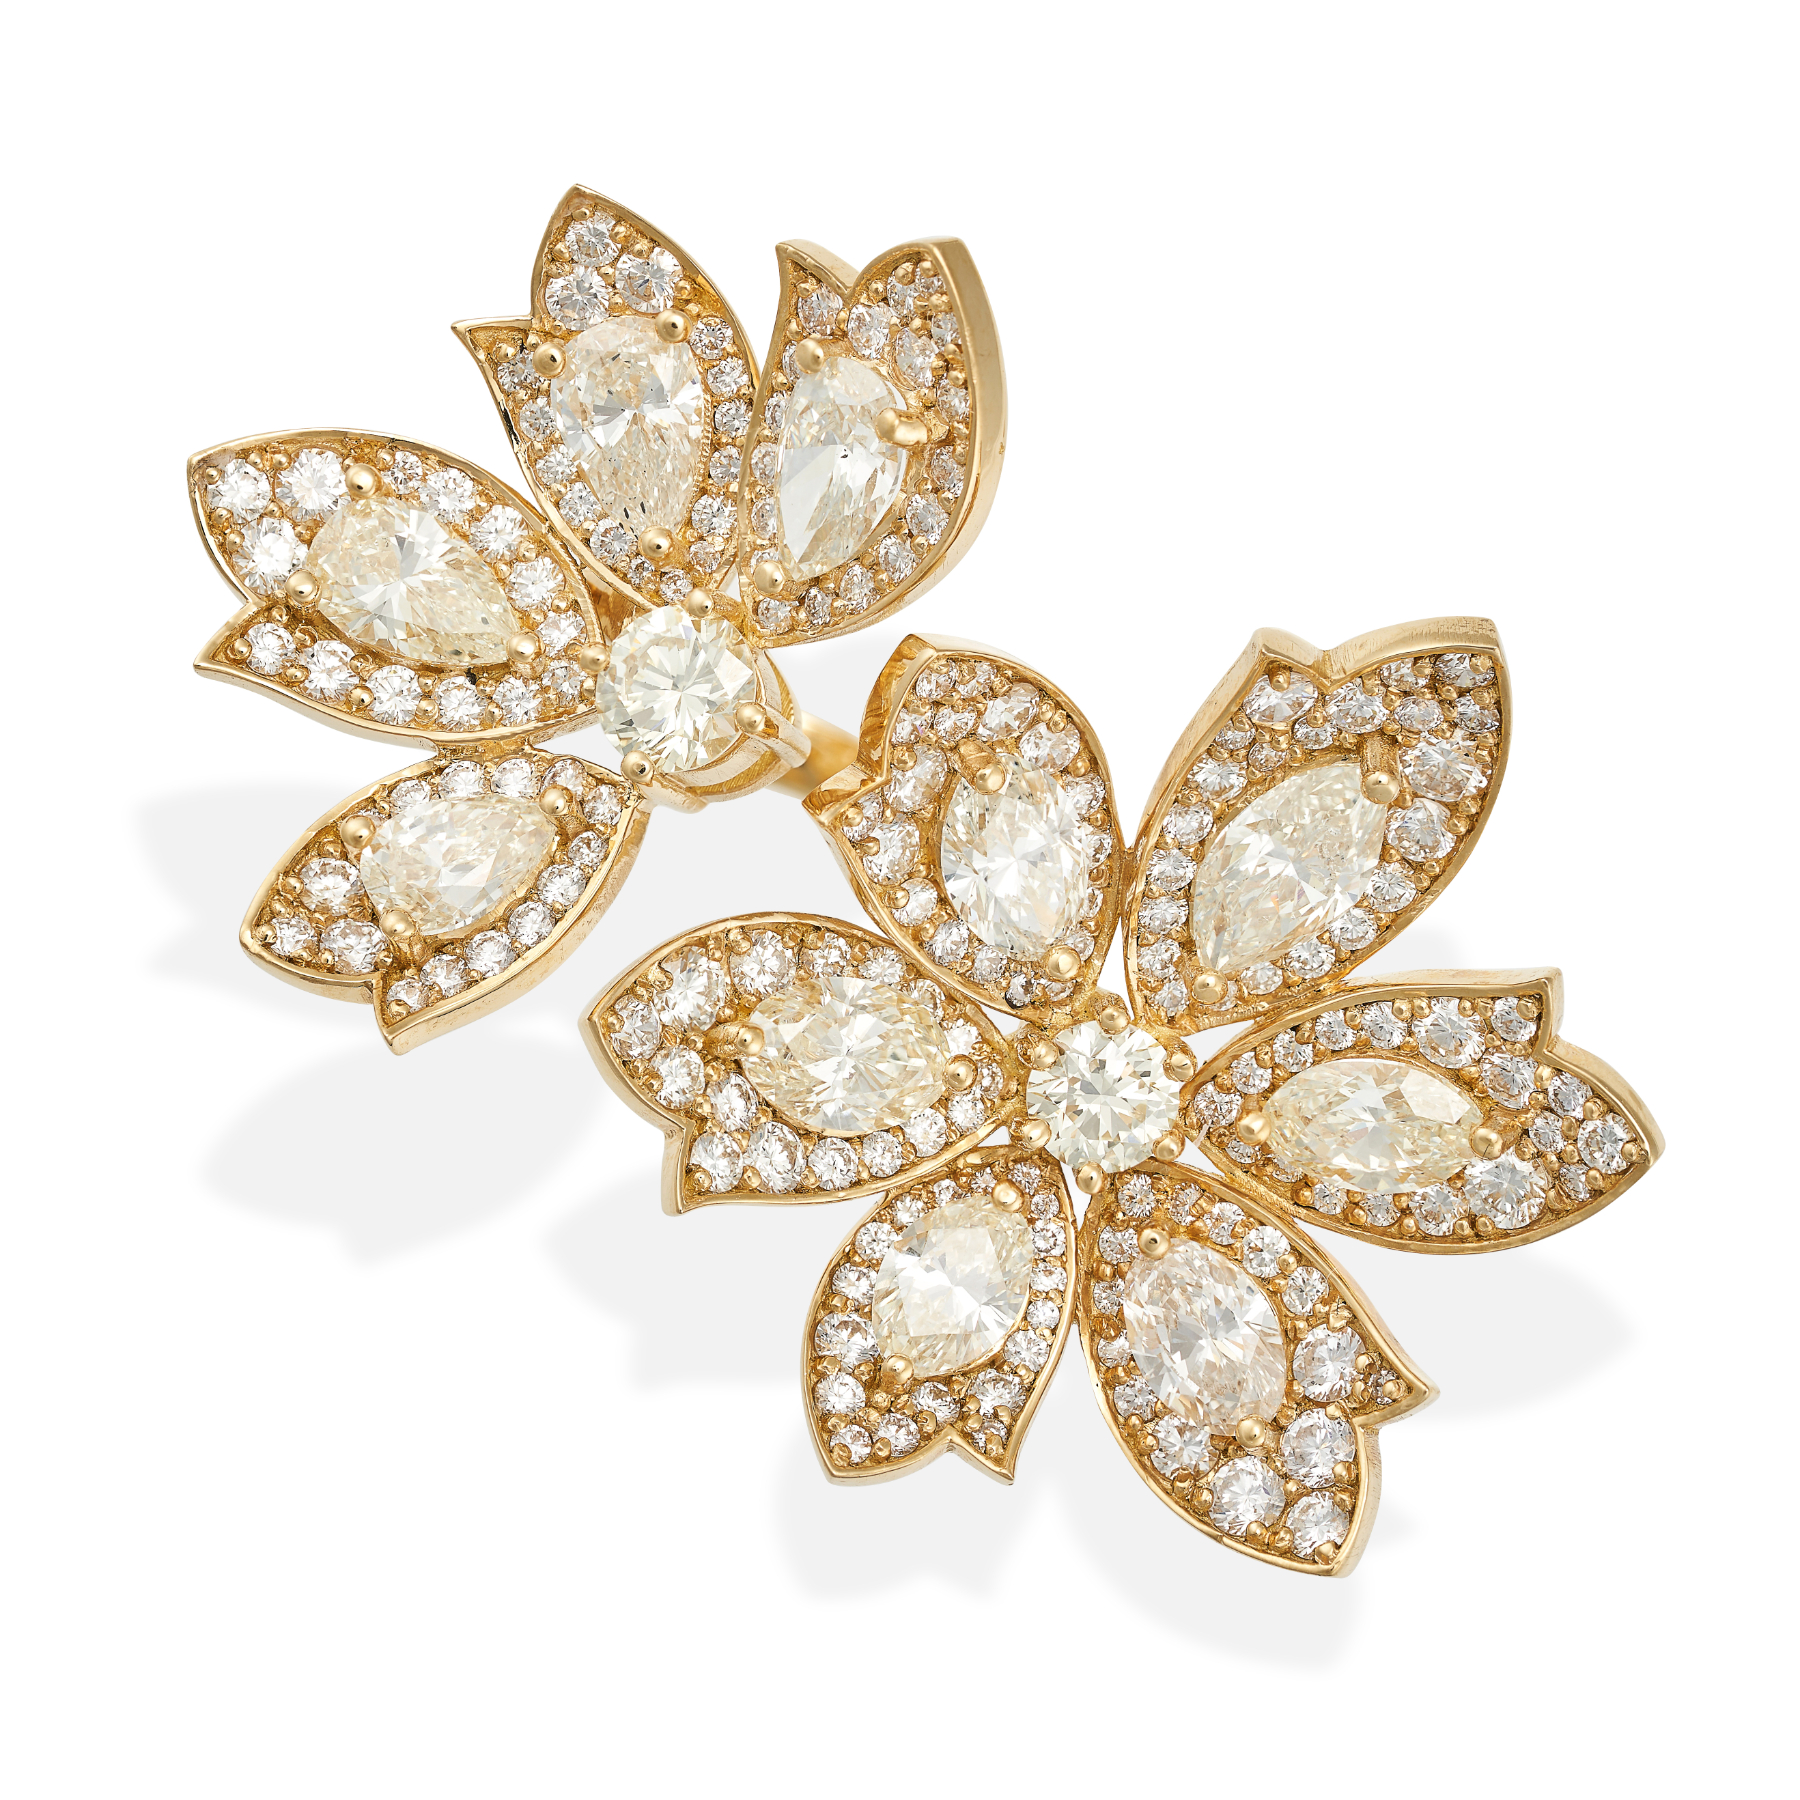 A DIAMOND FLOWER DRESS RING in 18ct yellow gold, the open band set on each side with a flower, the